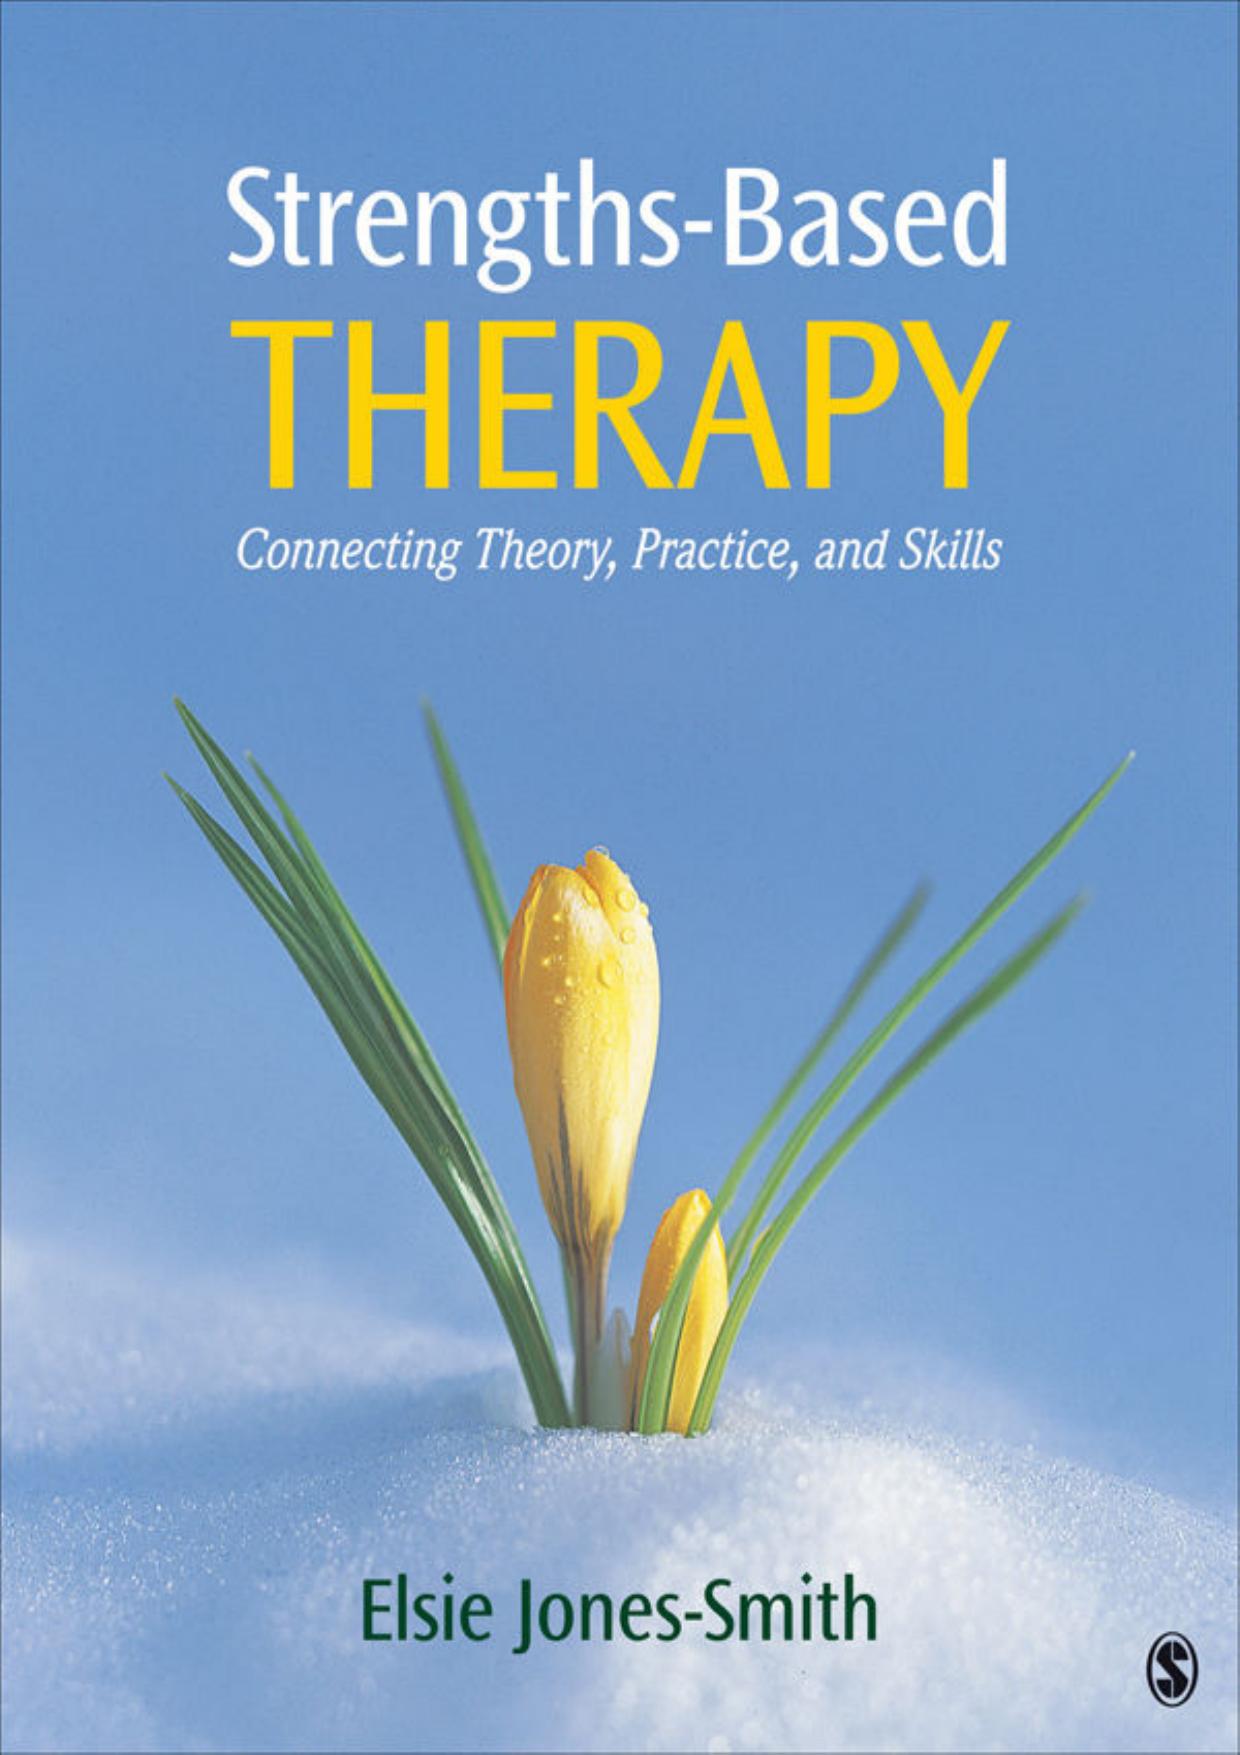 (eBook PDF)Strengths-Based Therapy: Connecting Theory, Practice and Skills 1st Edition by SAGE Publications, Inc; 1st edition (January 9, 2013)